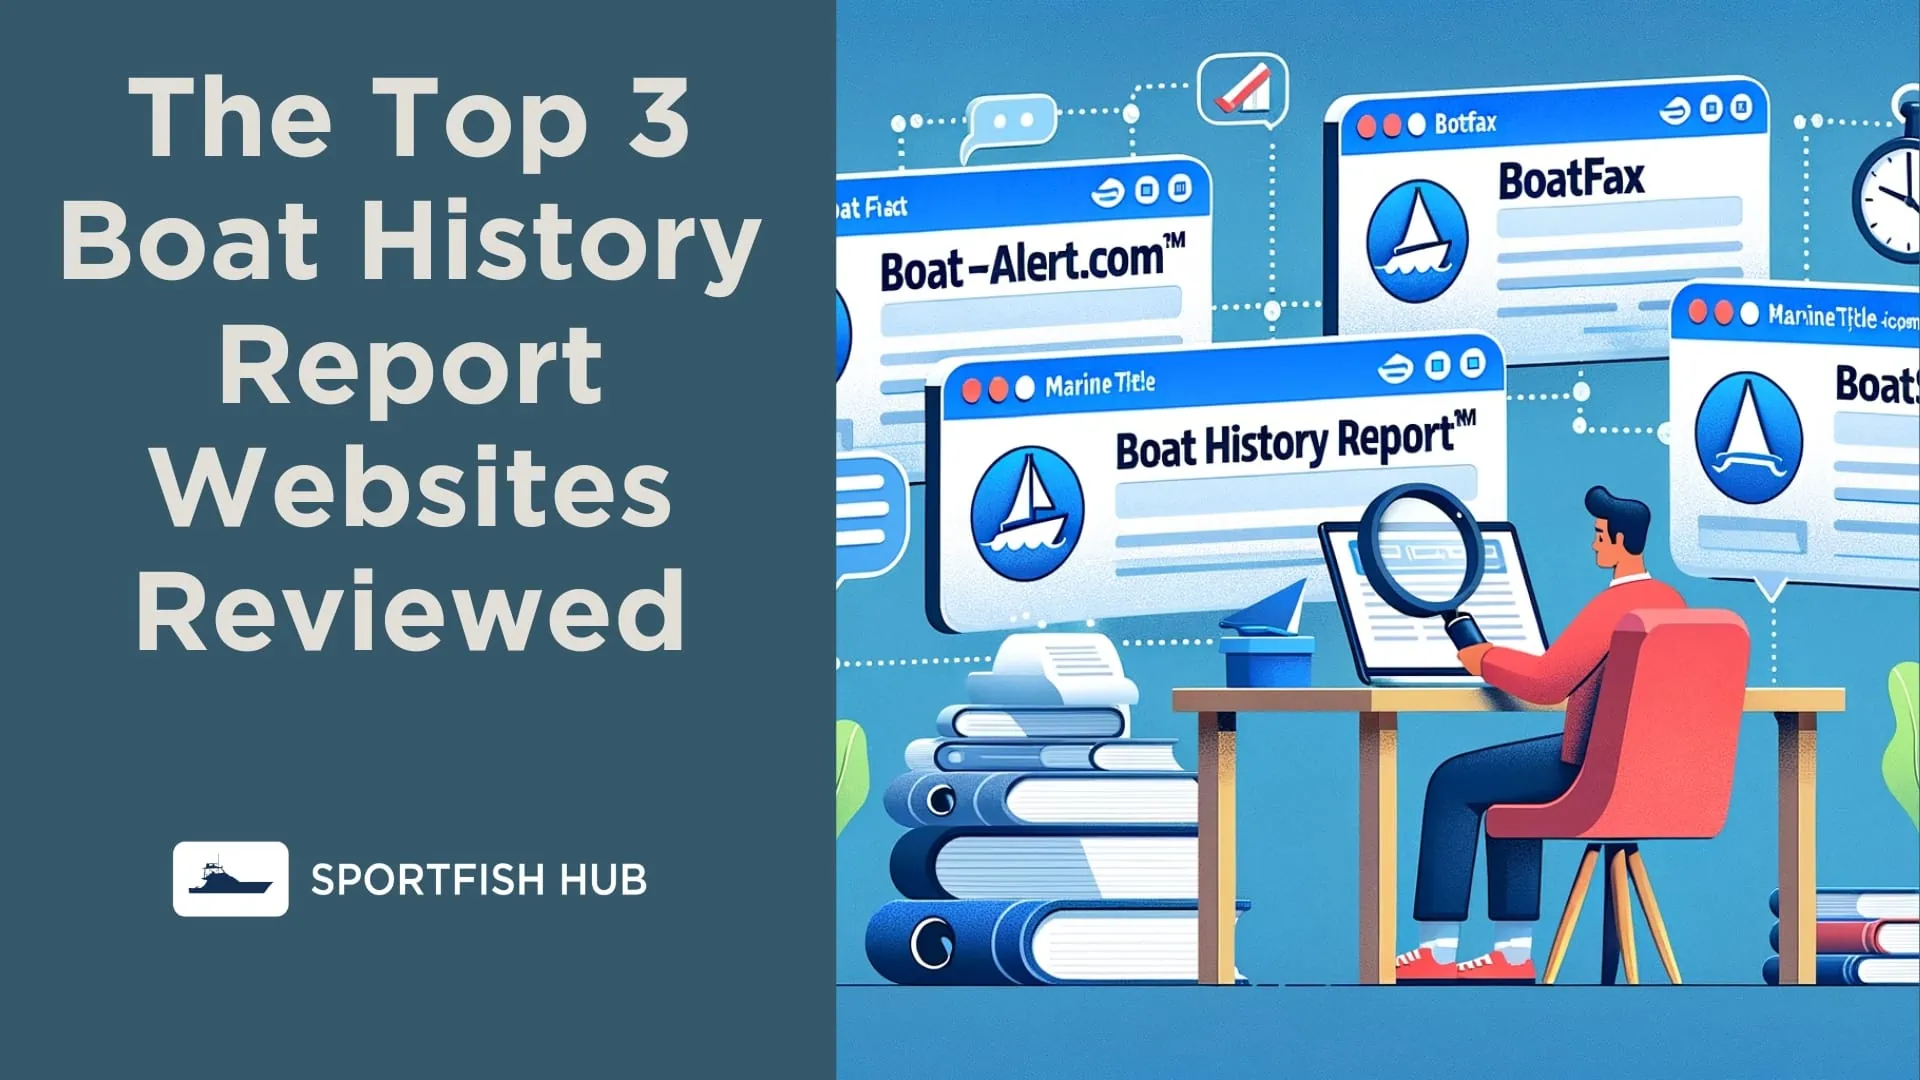 The Top 3 Boat History Report Websites Reviewed